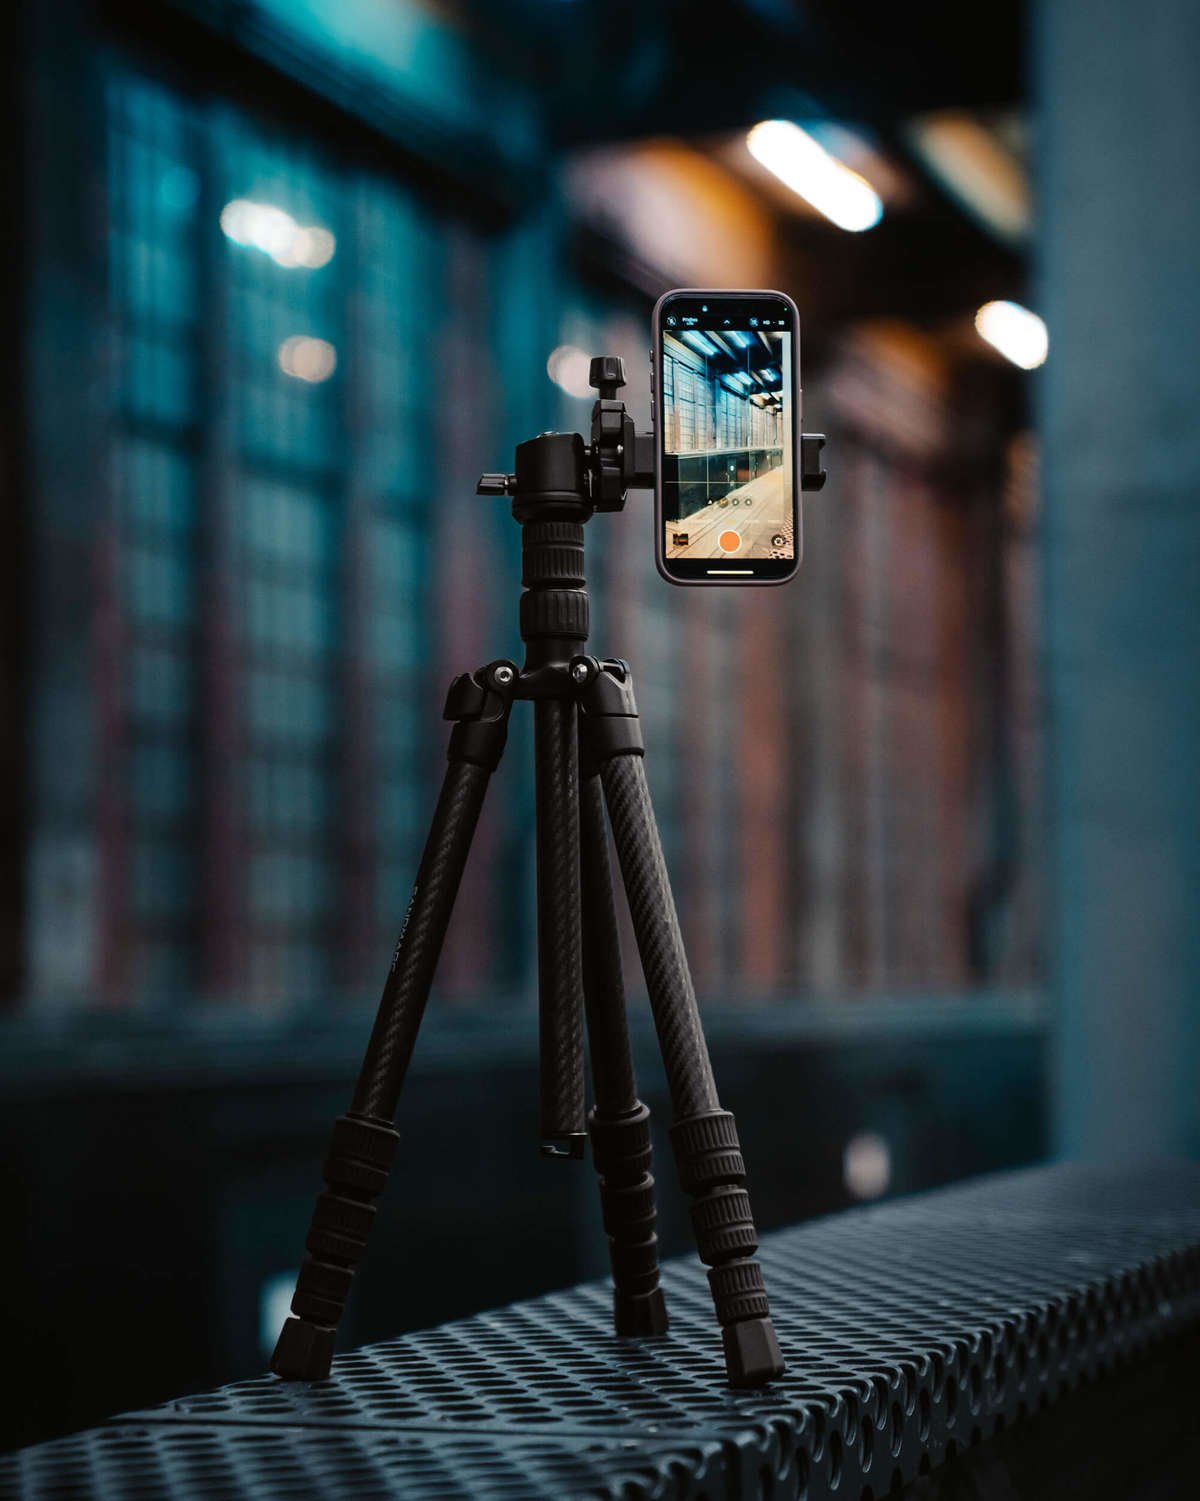 New iPhone Tripod Pro Edition from SANDMARC - 9to5Toys